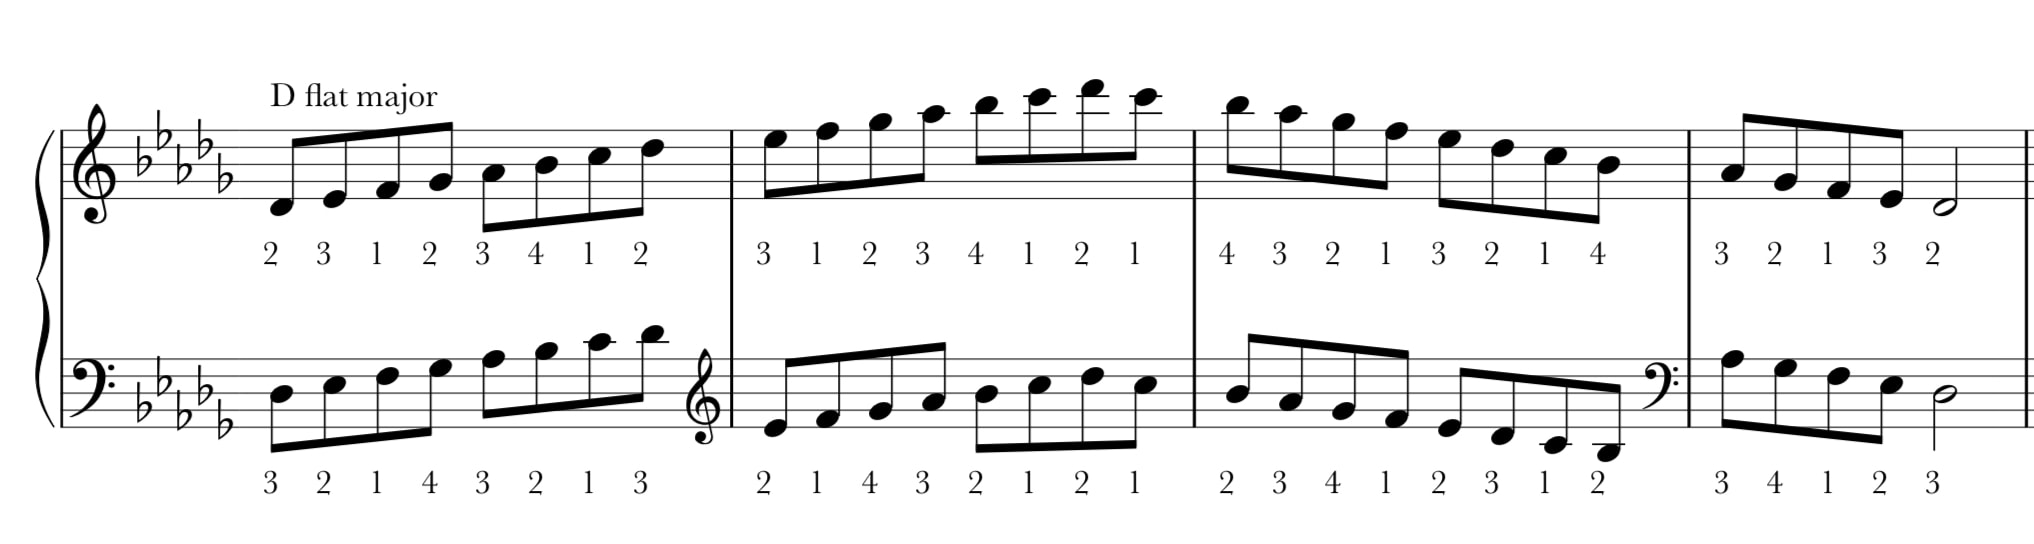 Notation for D flat major scale on piano